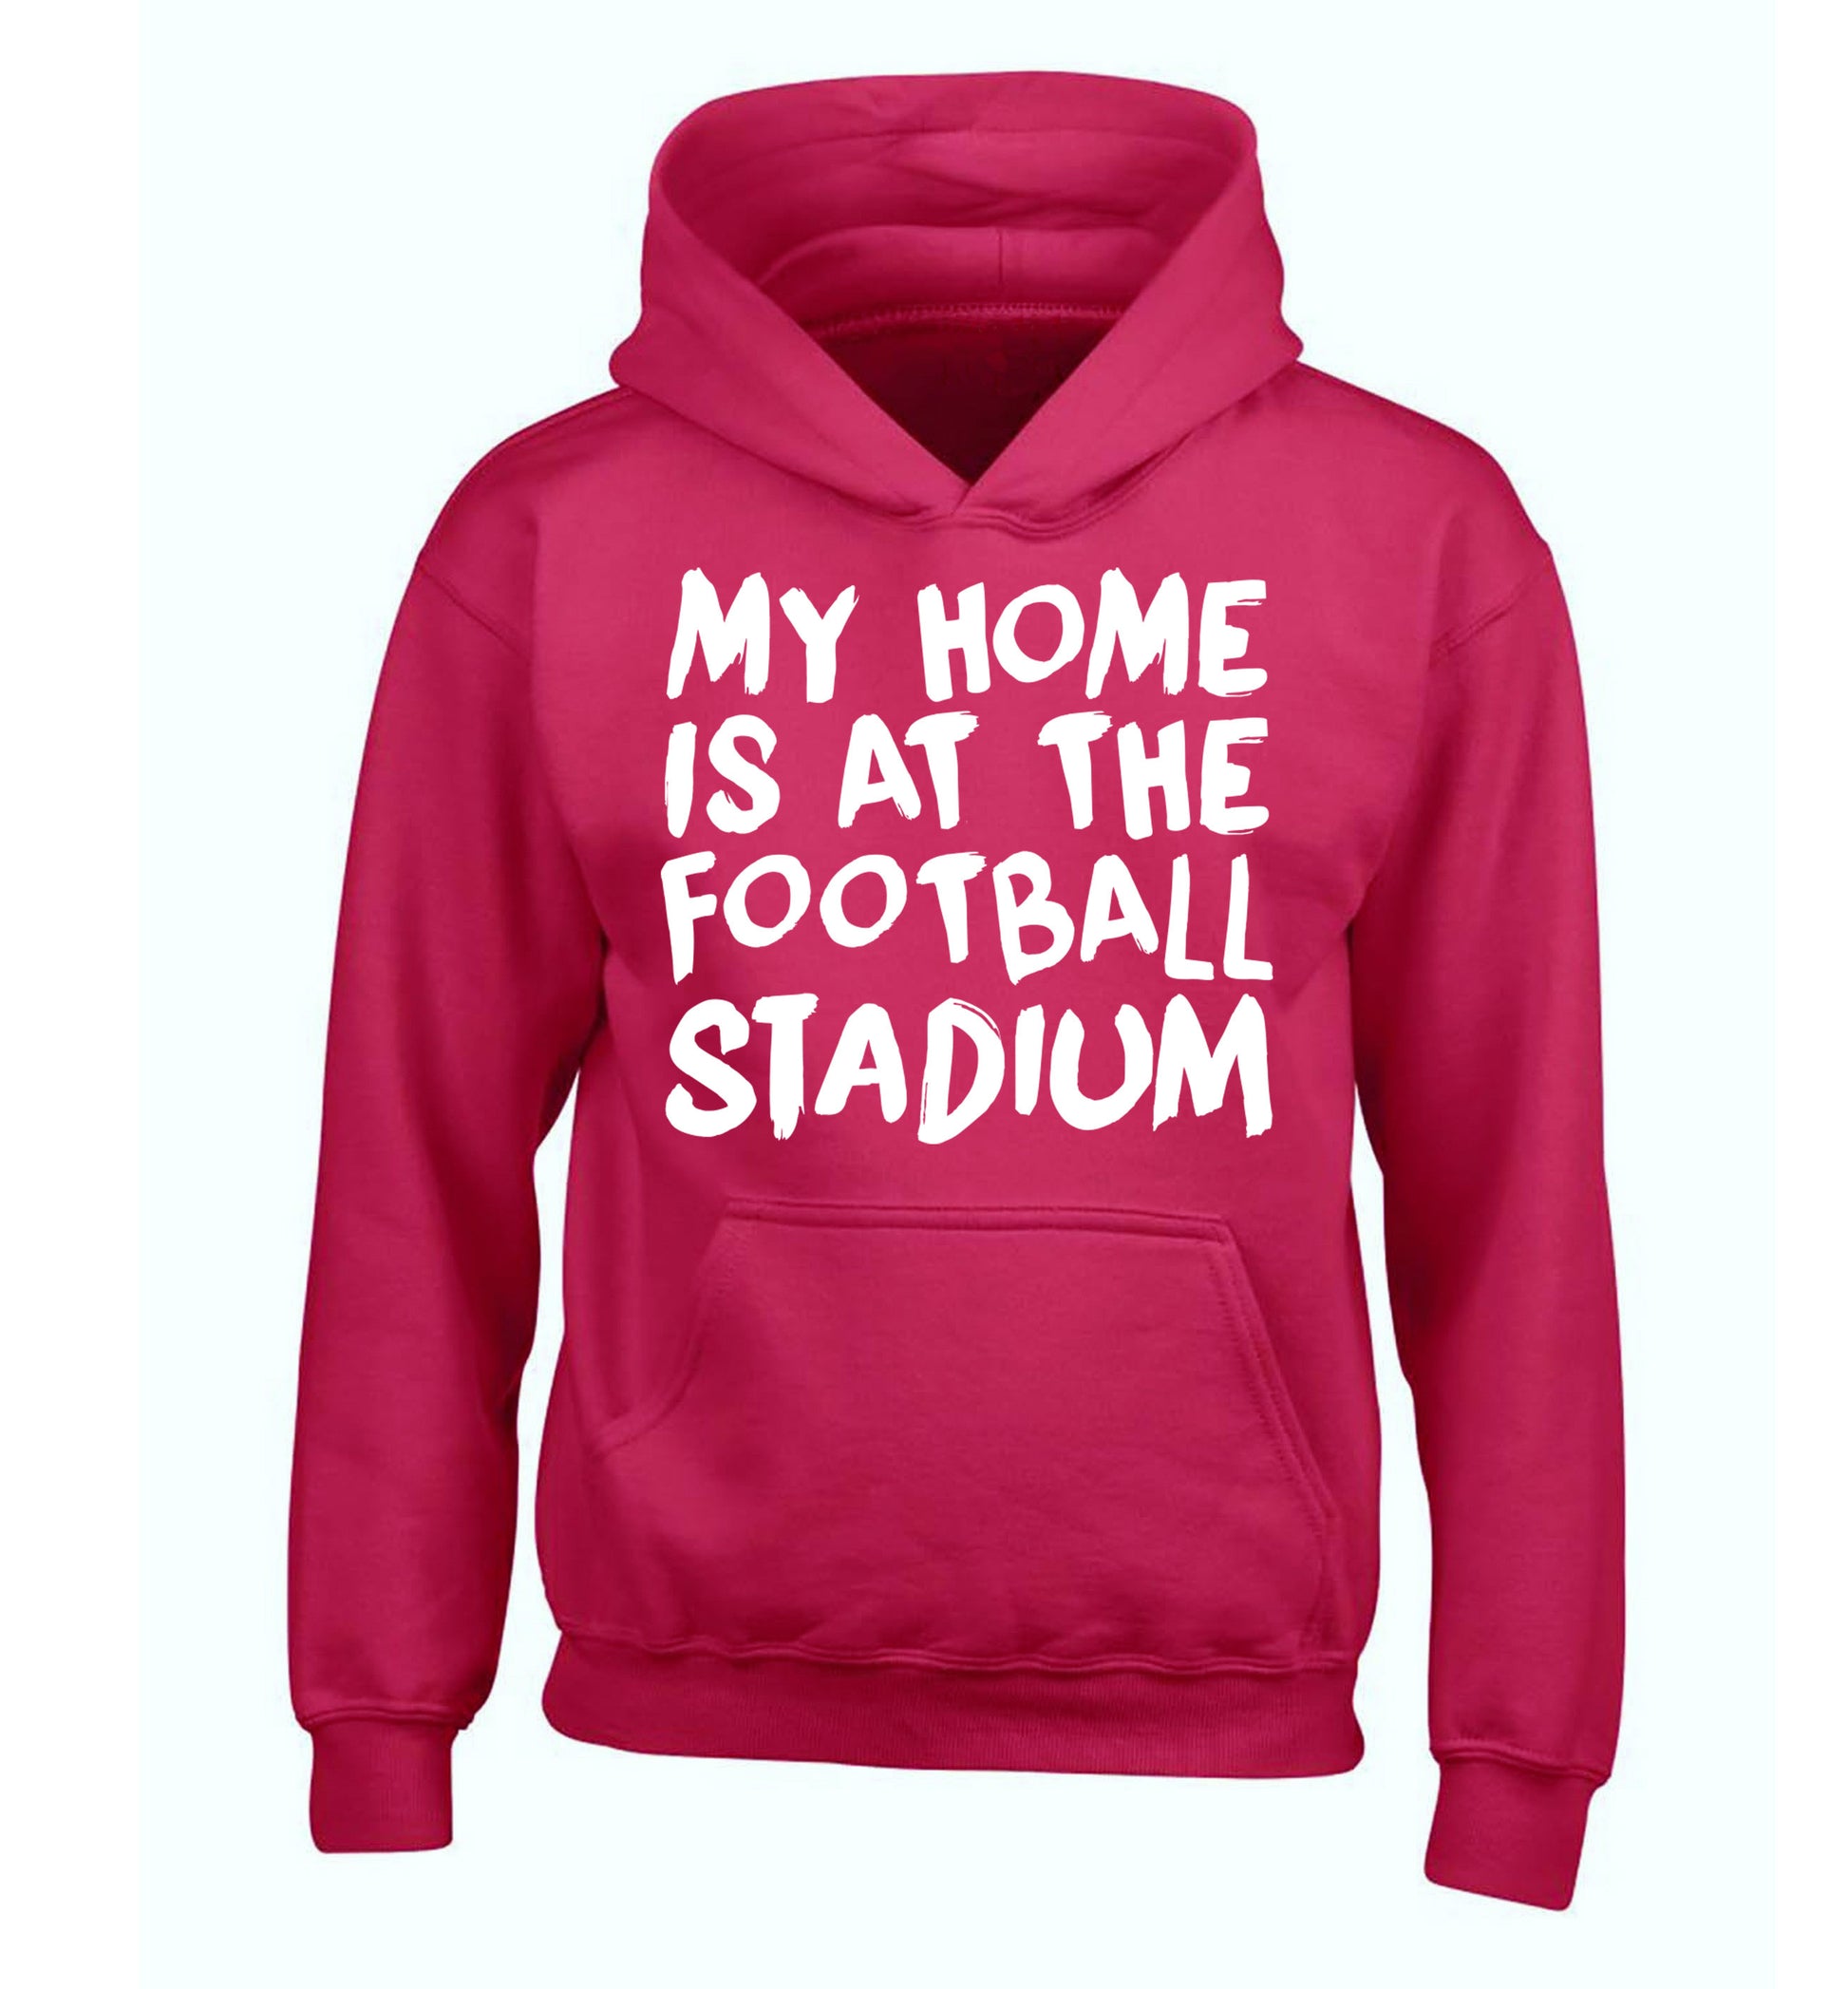 My home is at the football stadium children's pink hoodie 12-14 Years